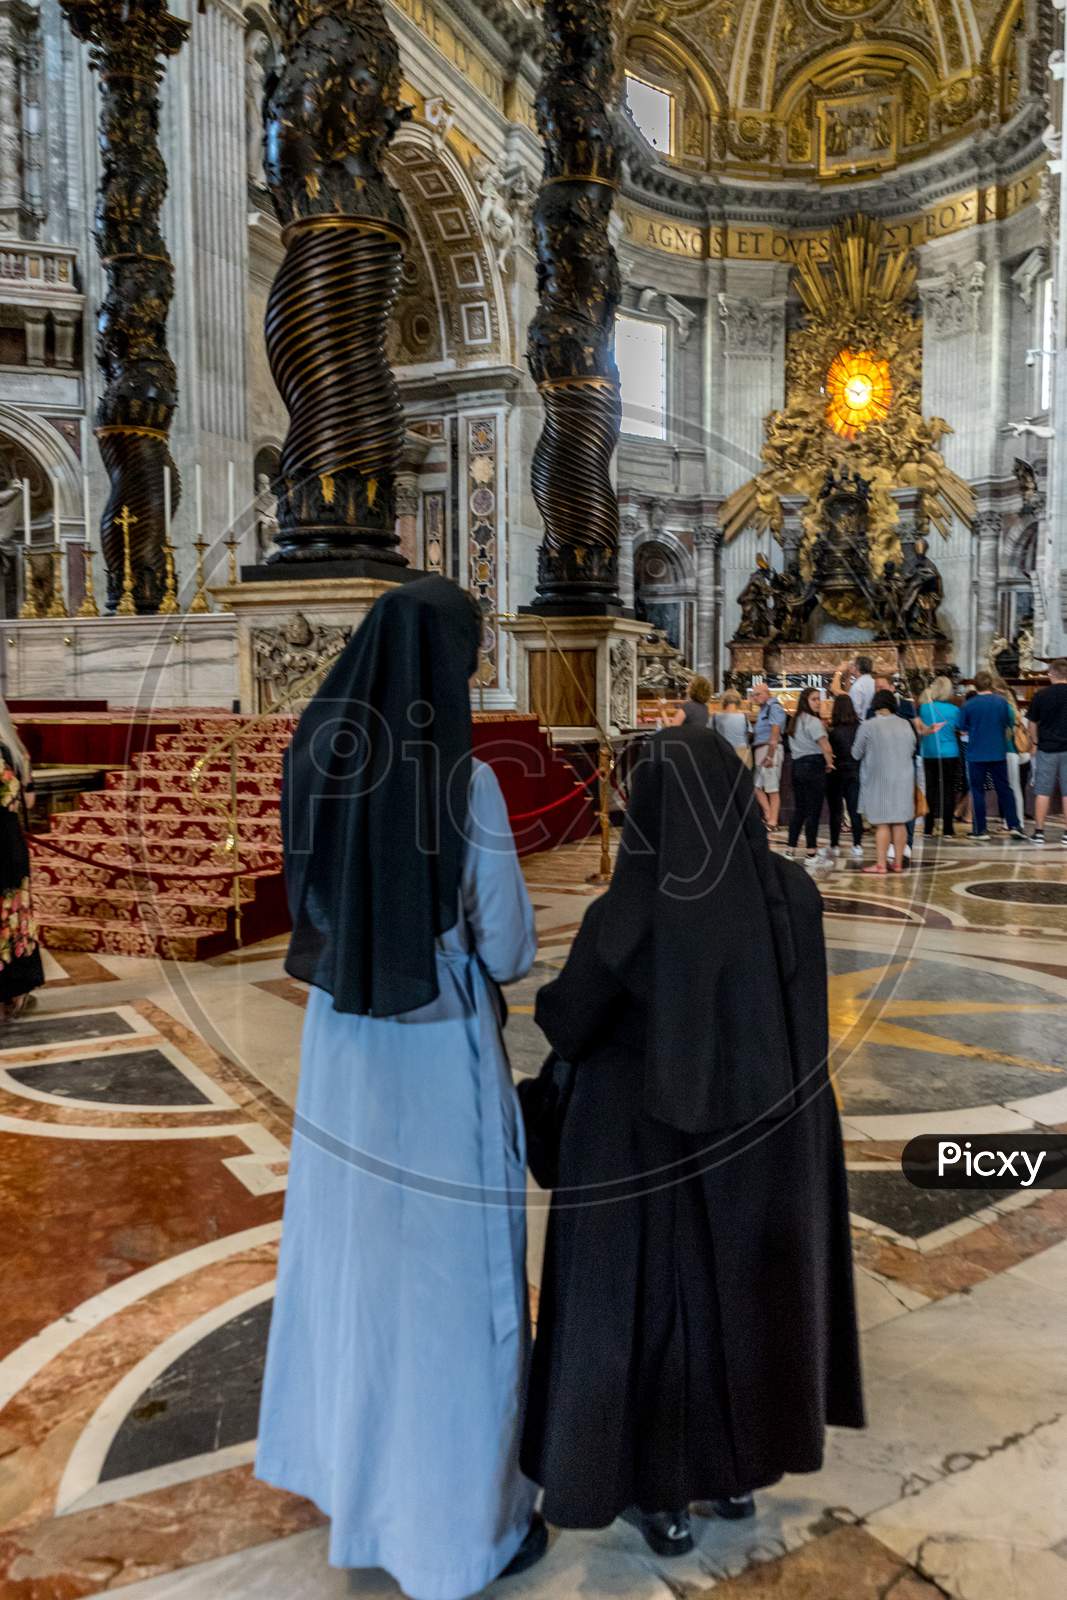 Vatican City, Italy - 23 June 2018: Christian Sisters Nuns In The Interiors Of Saint Peter'S Basilica At St. Peter'S Square In Vatican City